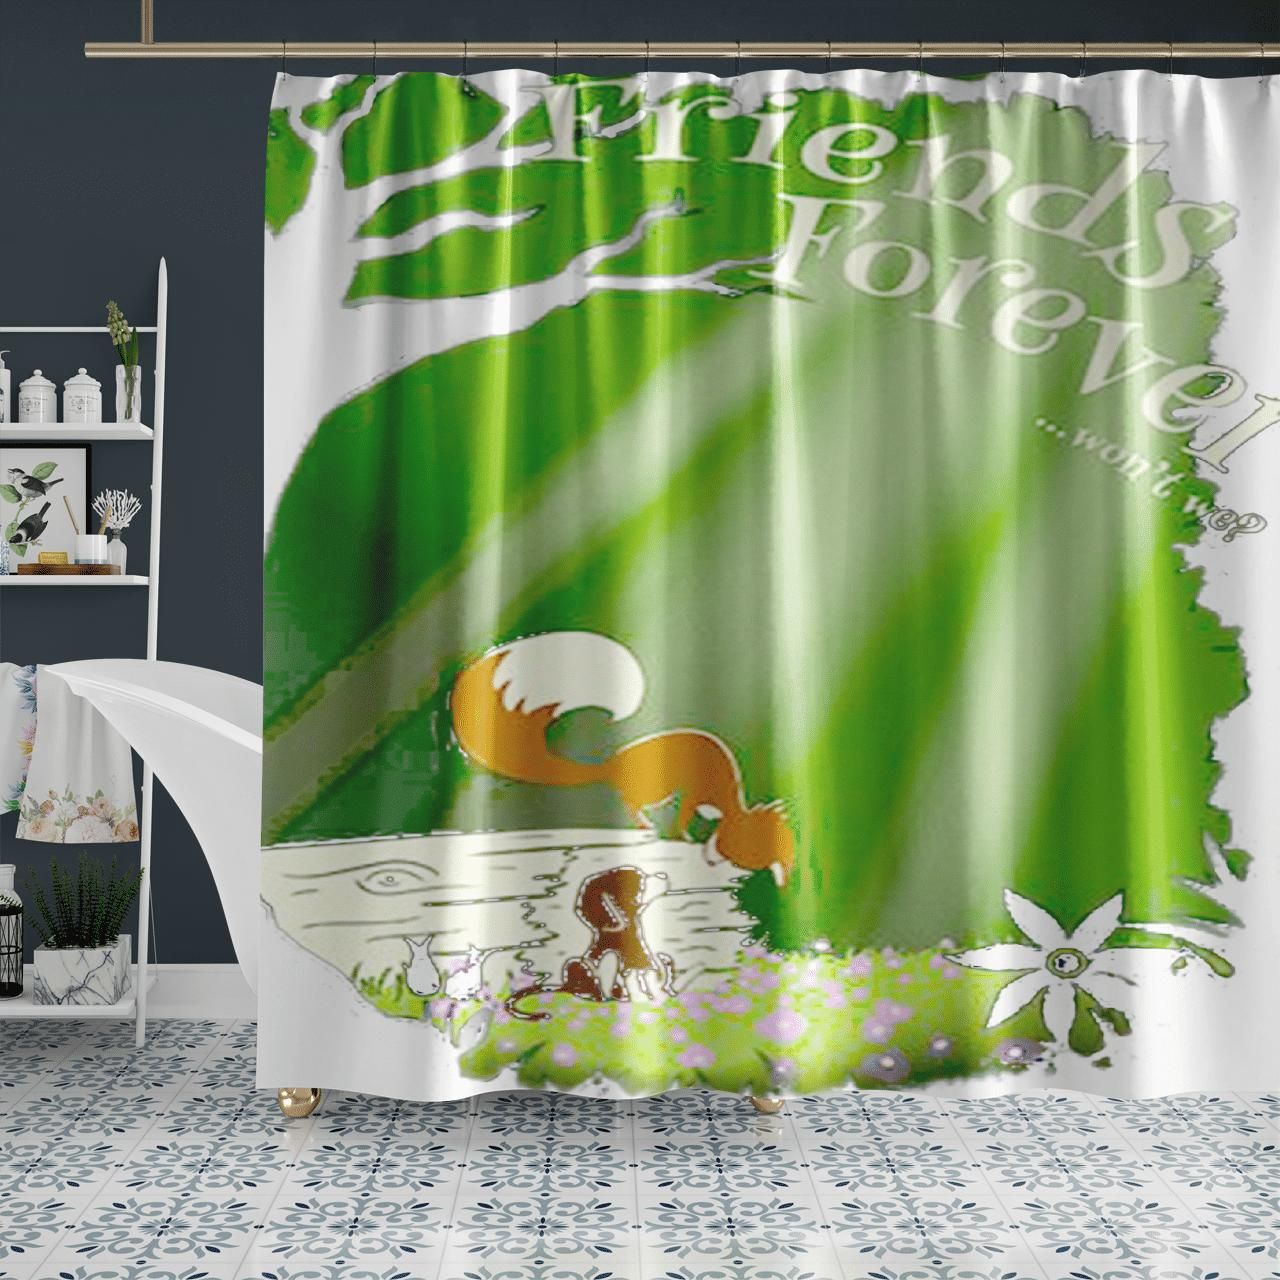 We Will Be Friend Forever Shower Curtain